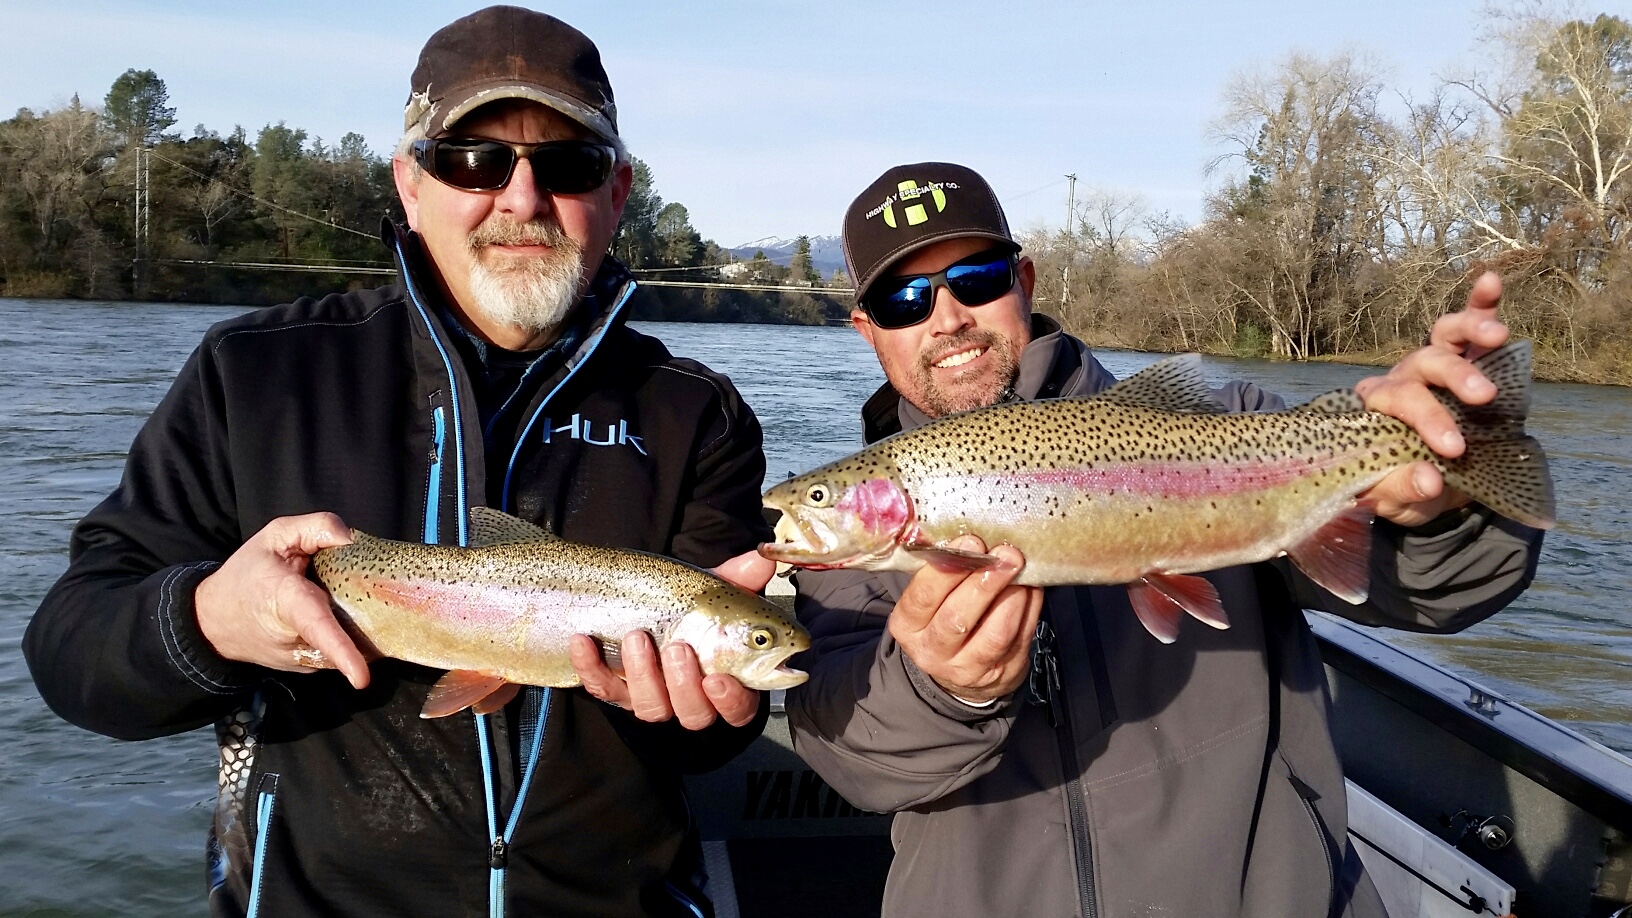 Fast action Sac River fishing guides!